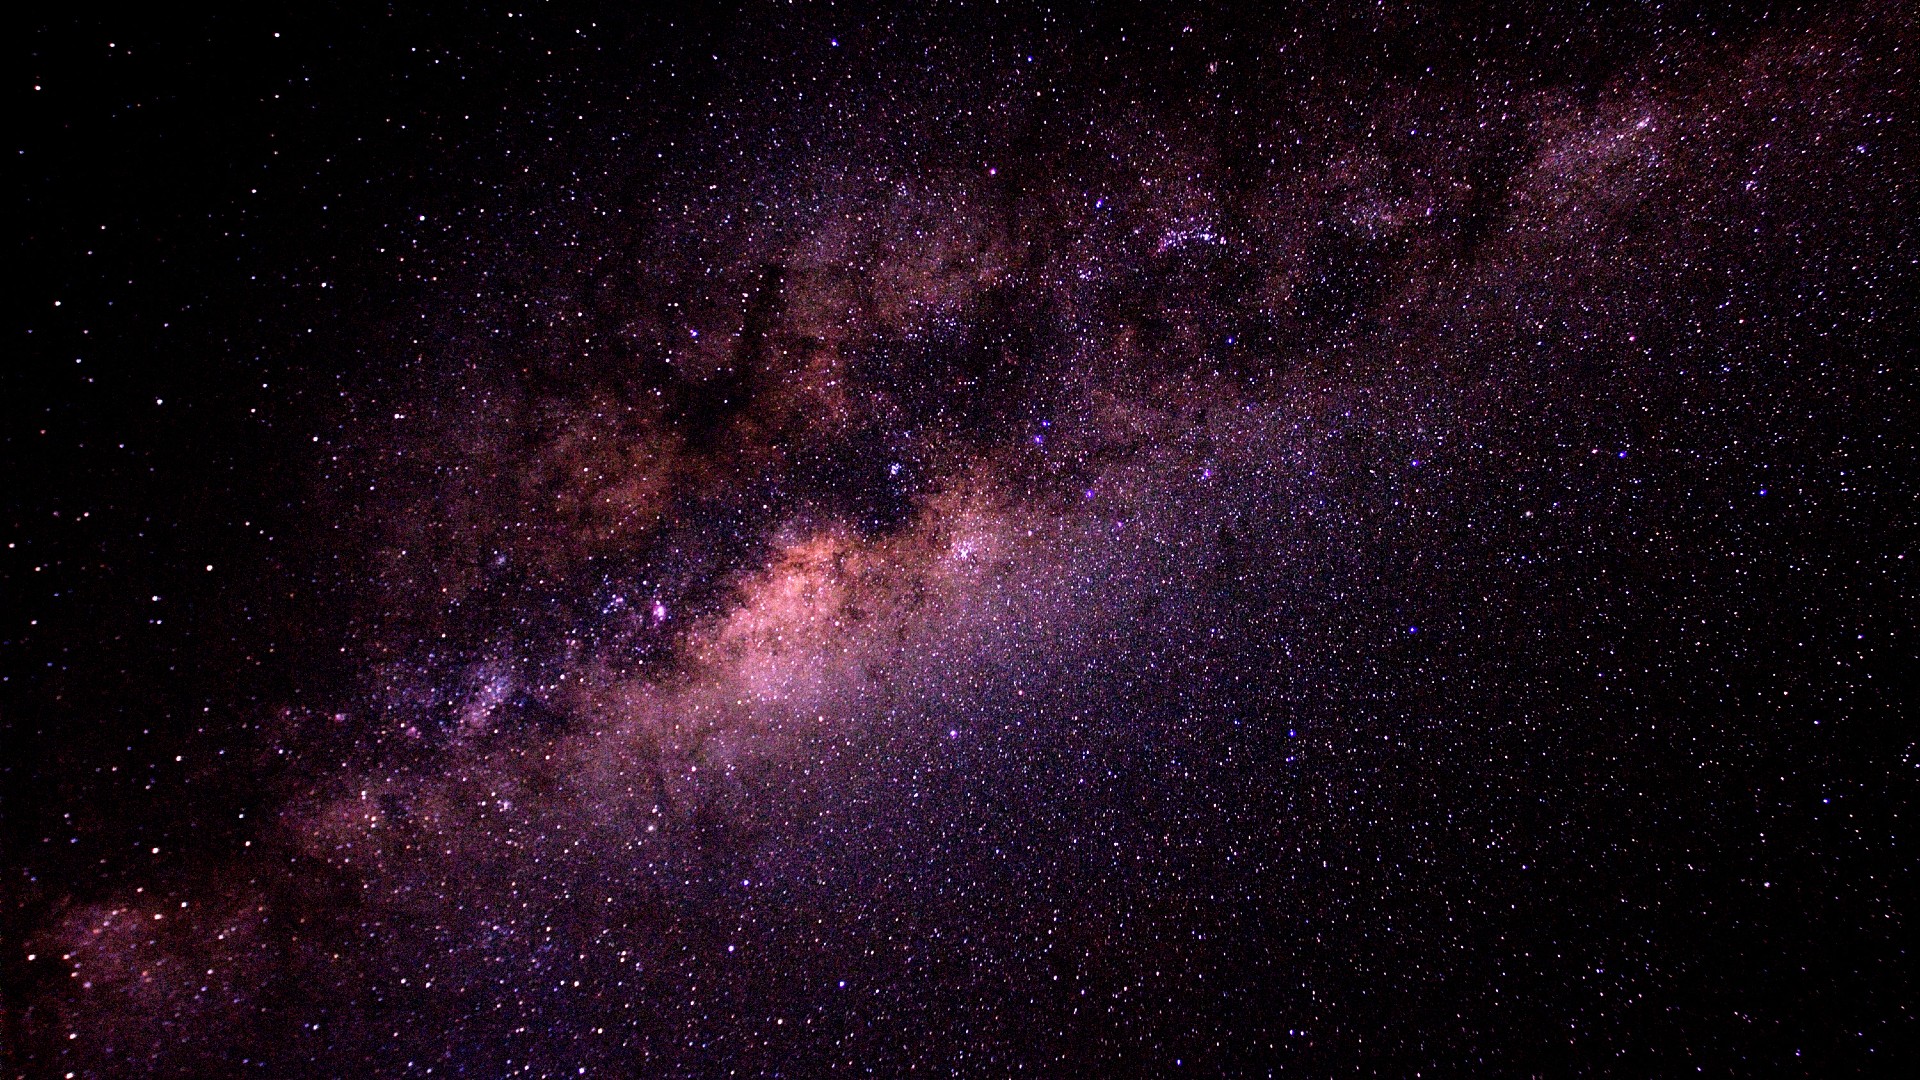 Why is space so dark even though the universe is filled with stars? Space